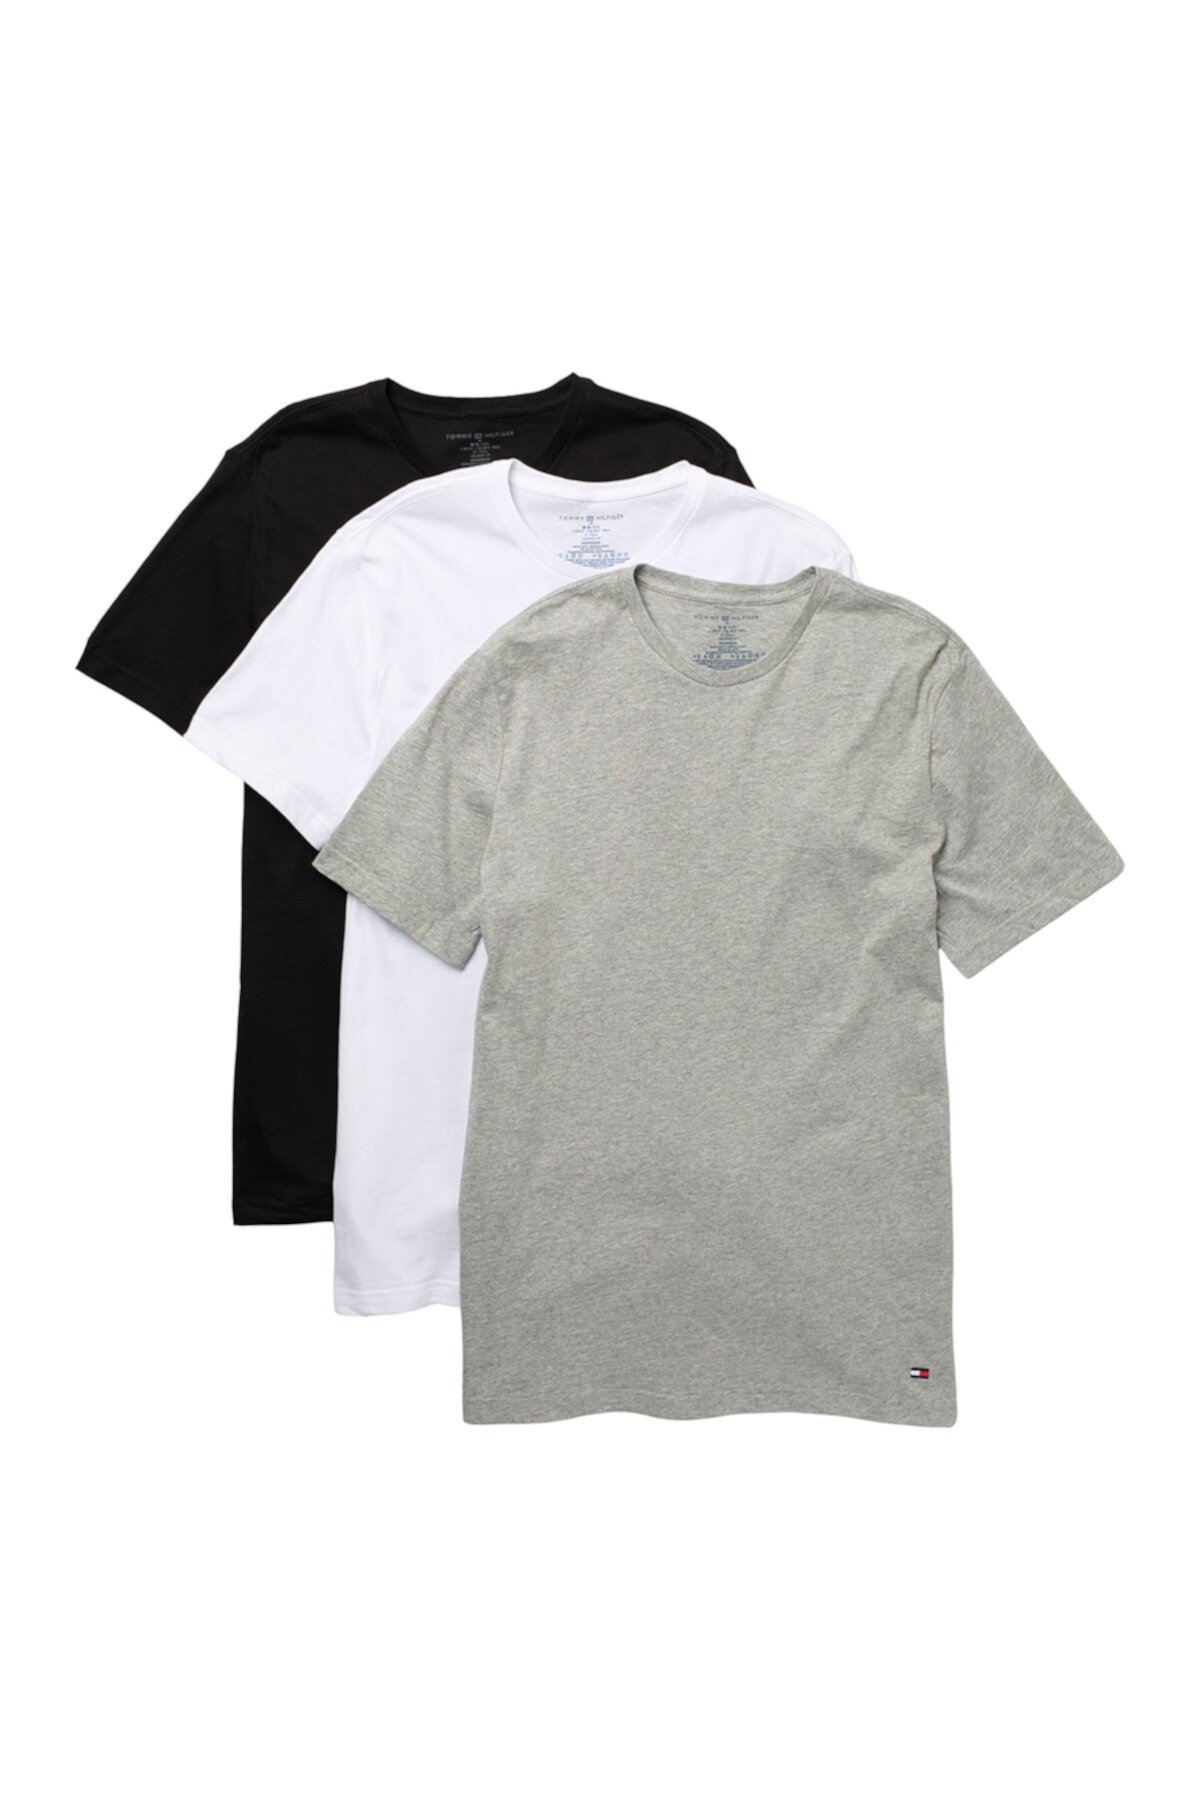 Classic Cotton Crew Neck T-Shirt - Pack of 3 Tommy Hilfiger